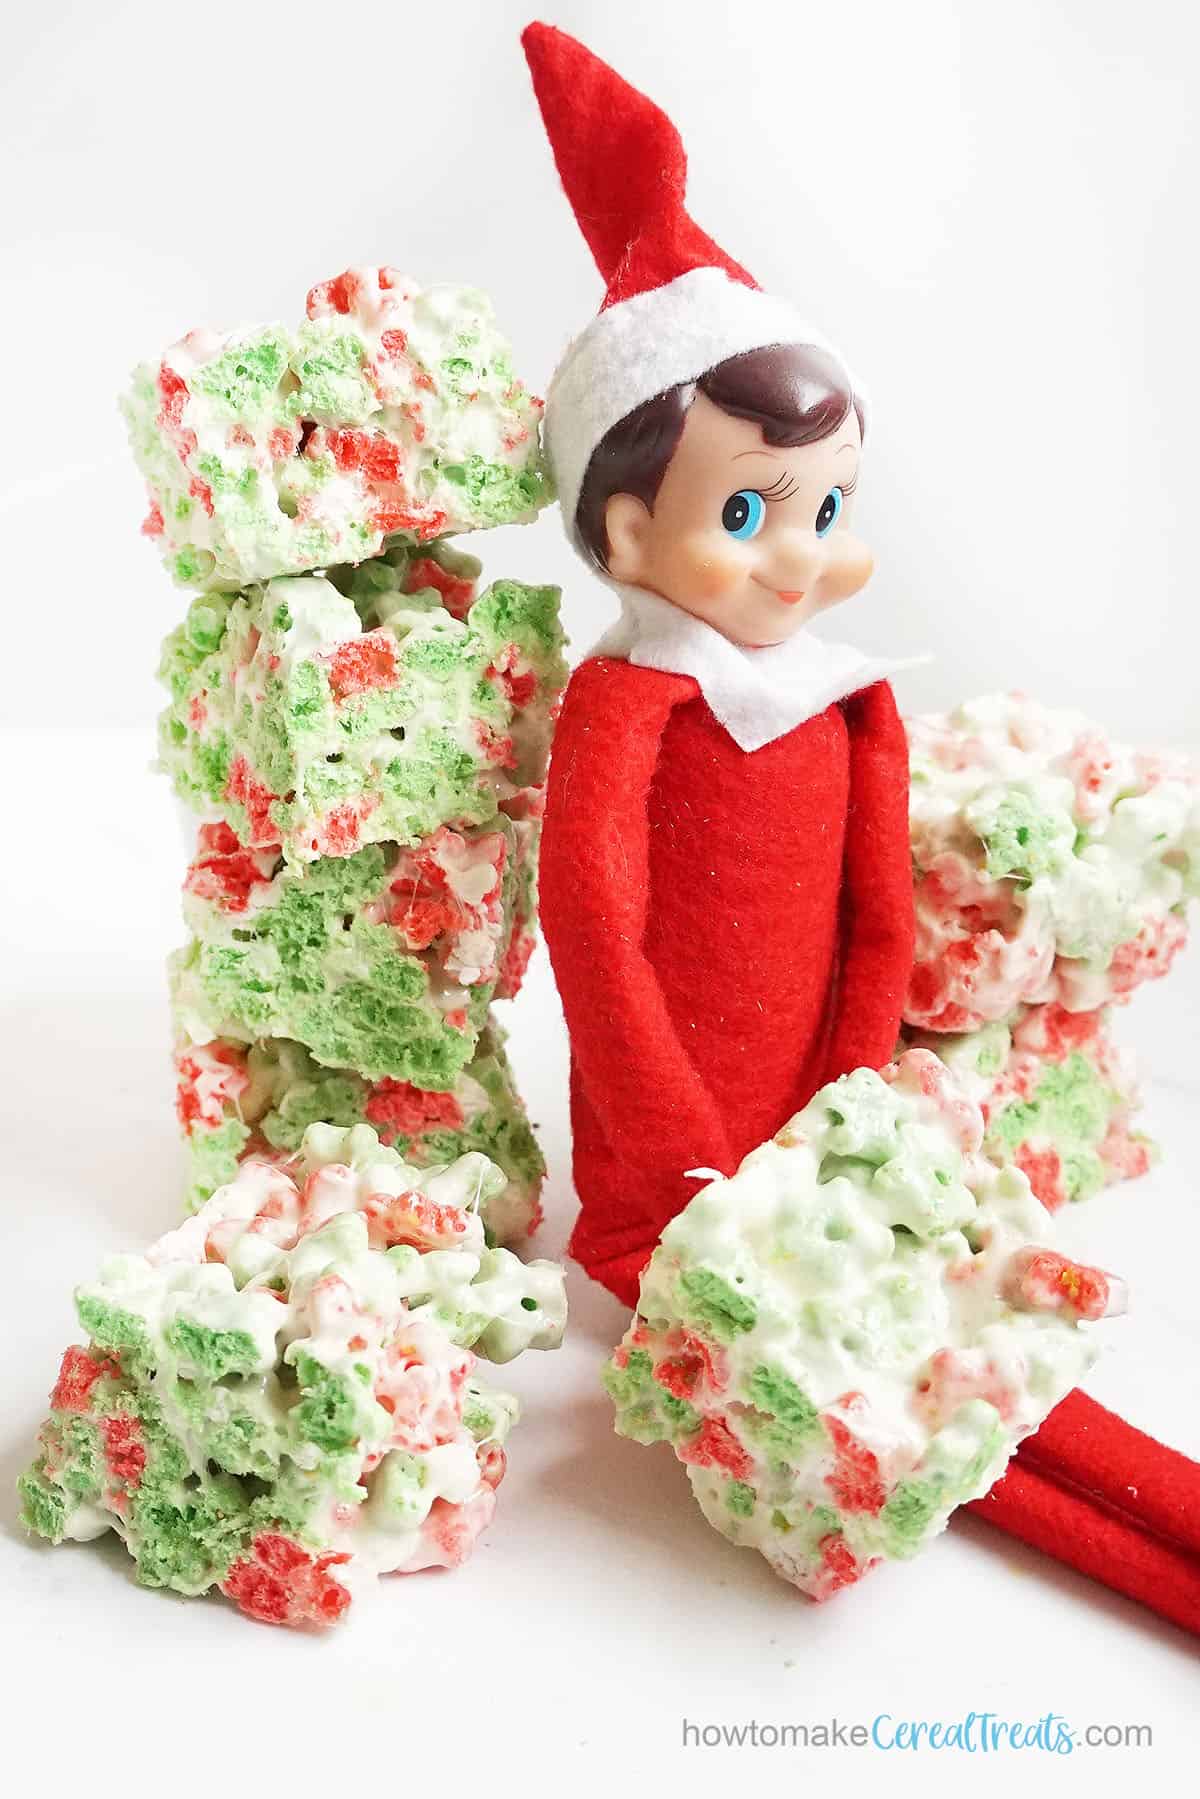 Elf on the Shelf cereal treats for Christmas 